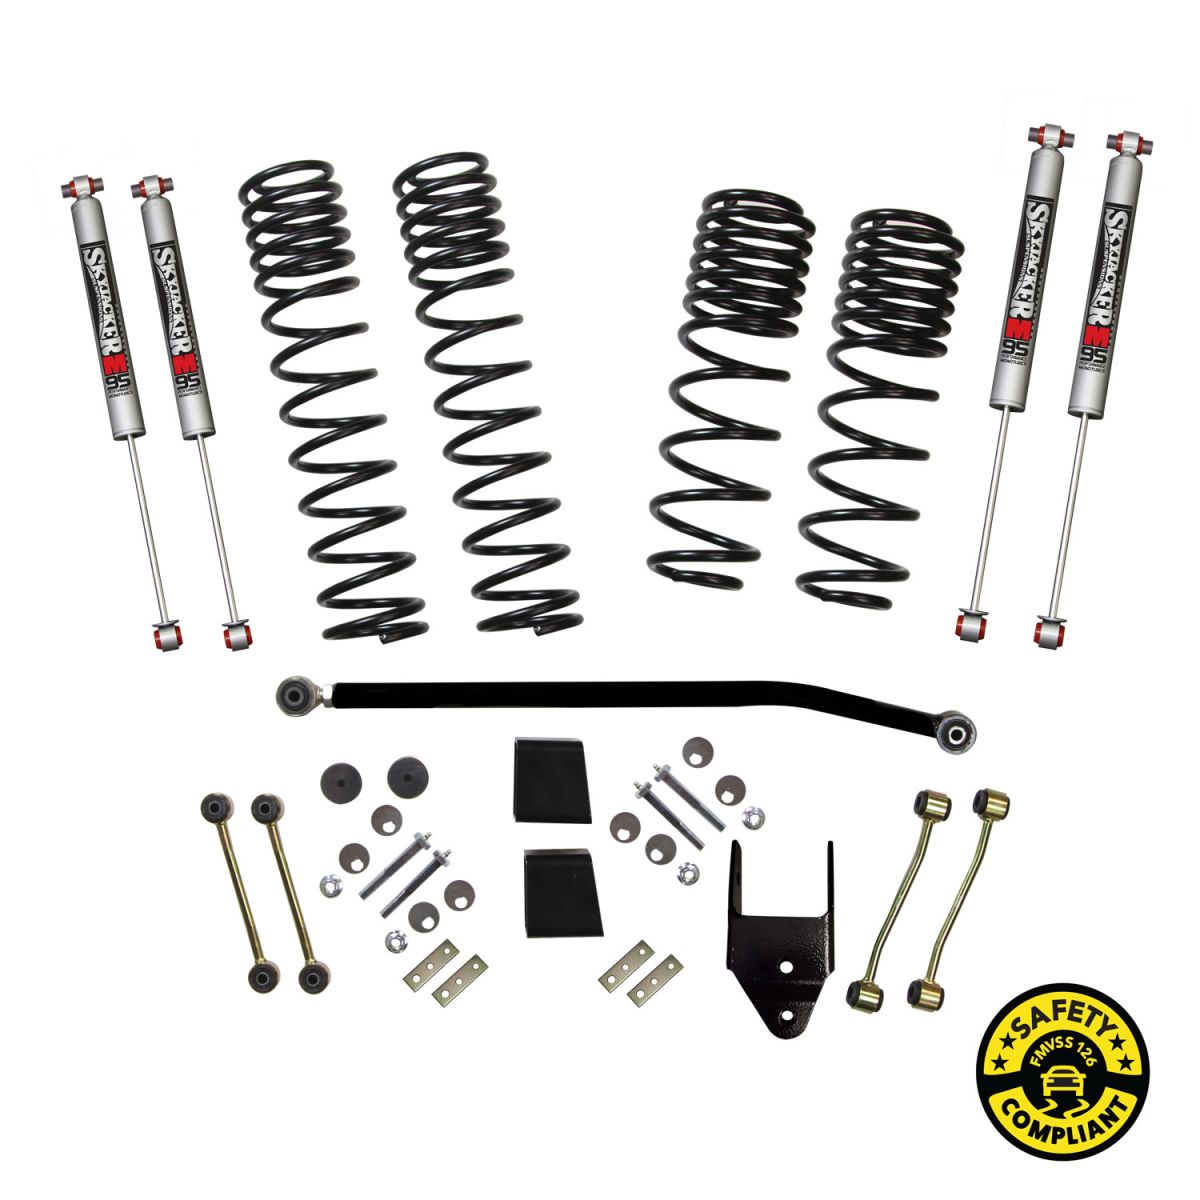 Skyjacker Suspension - Skyjacker Dual Rate Long Travel 3.5-4" Lift Kit System with M95 Shocks For 18-20 Jeep Wrangler JL Rubicon Unlimited Four Door